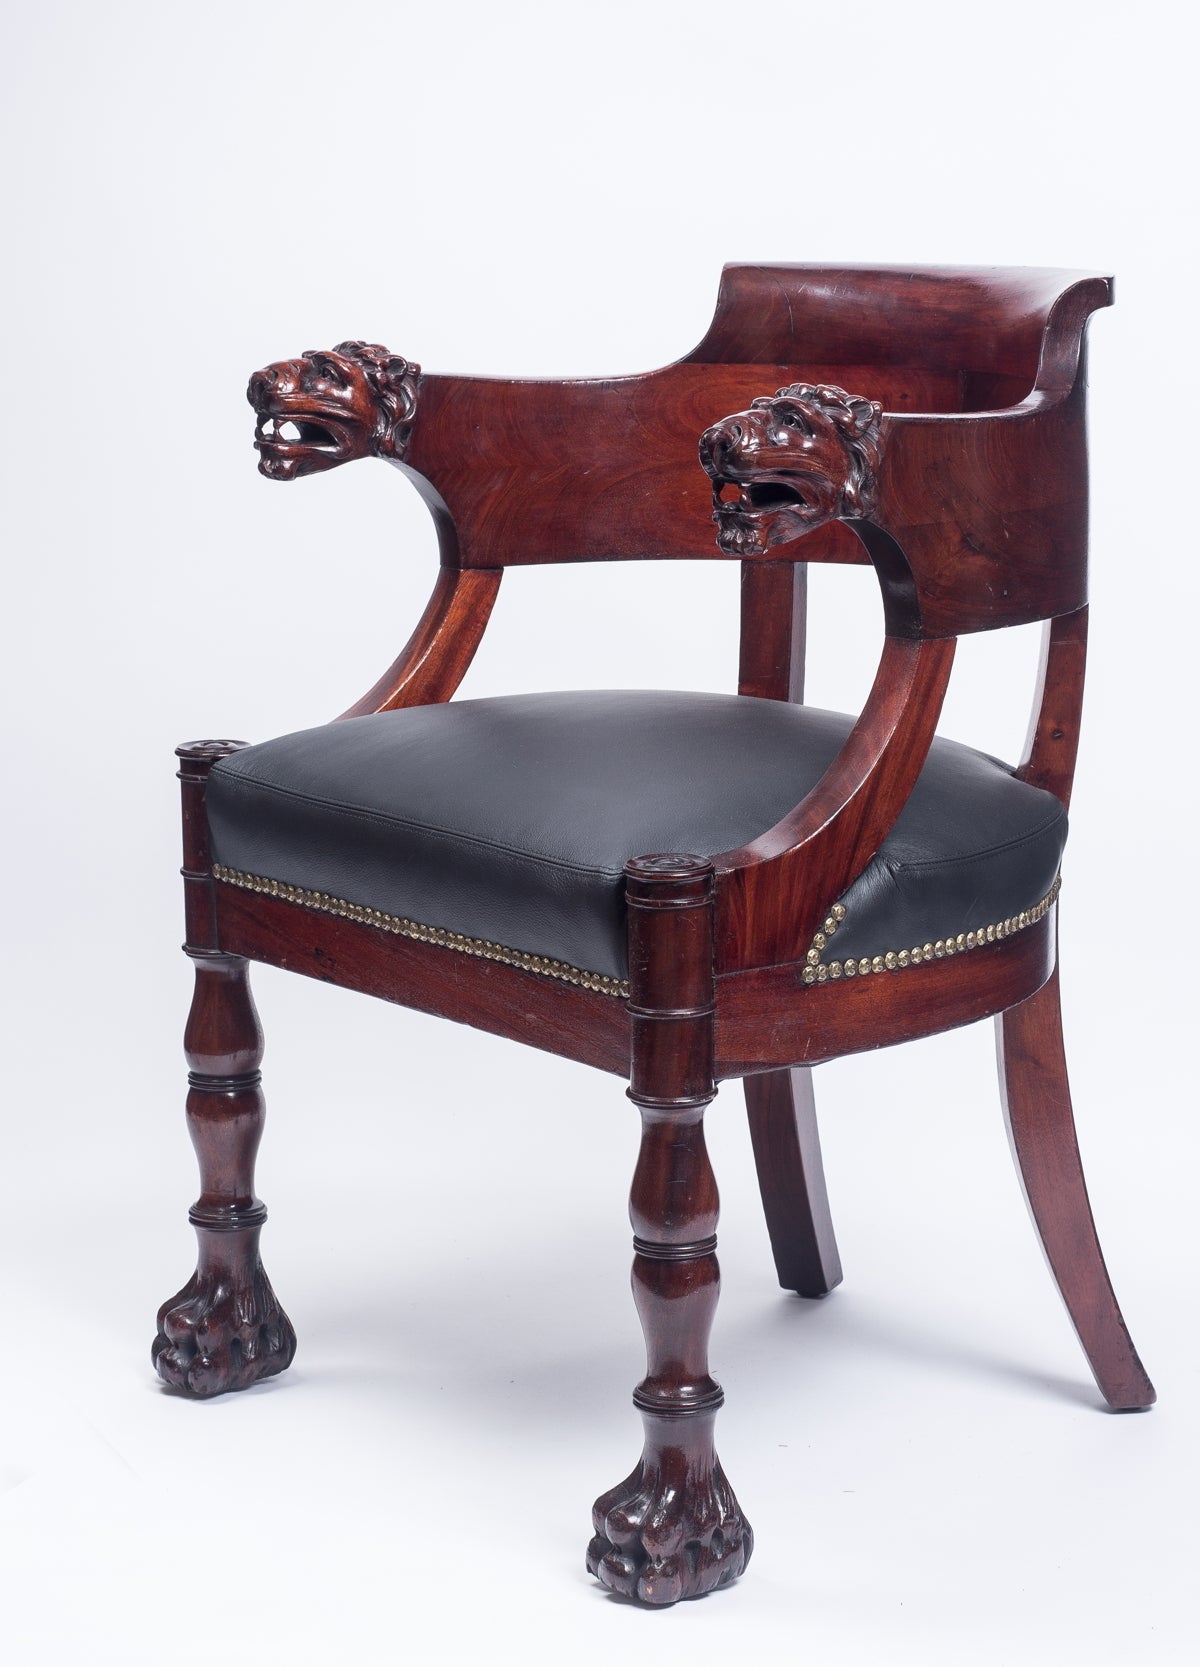 The curved back terminating in carved lion's heads above a black leather seat on ring-turned front legs ending in lion feet and back saber legs.